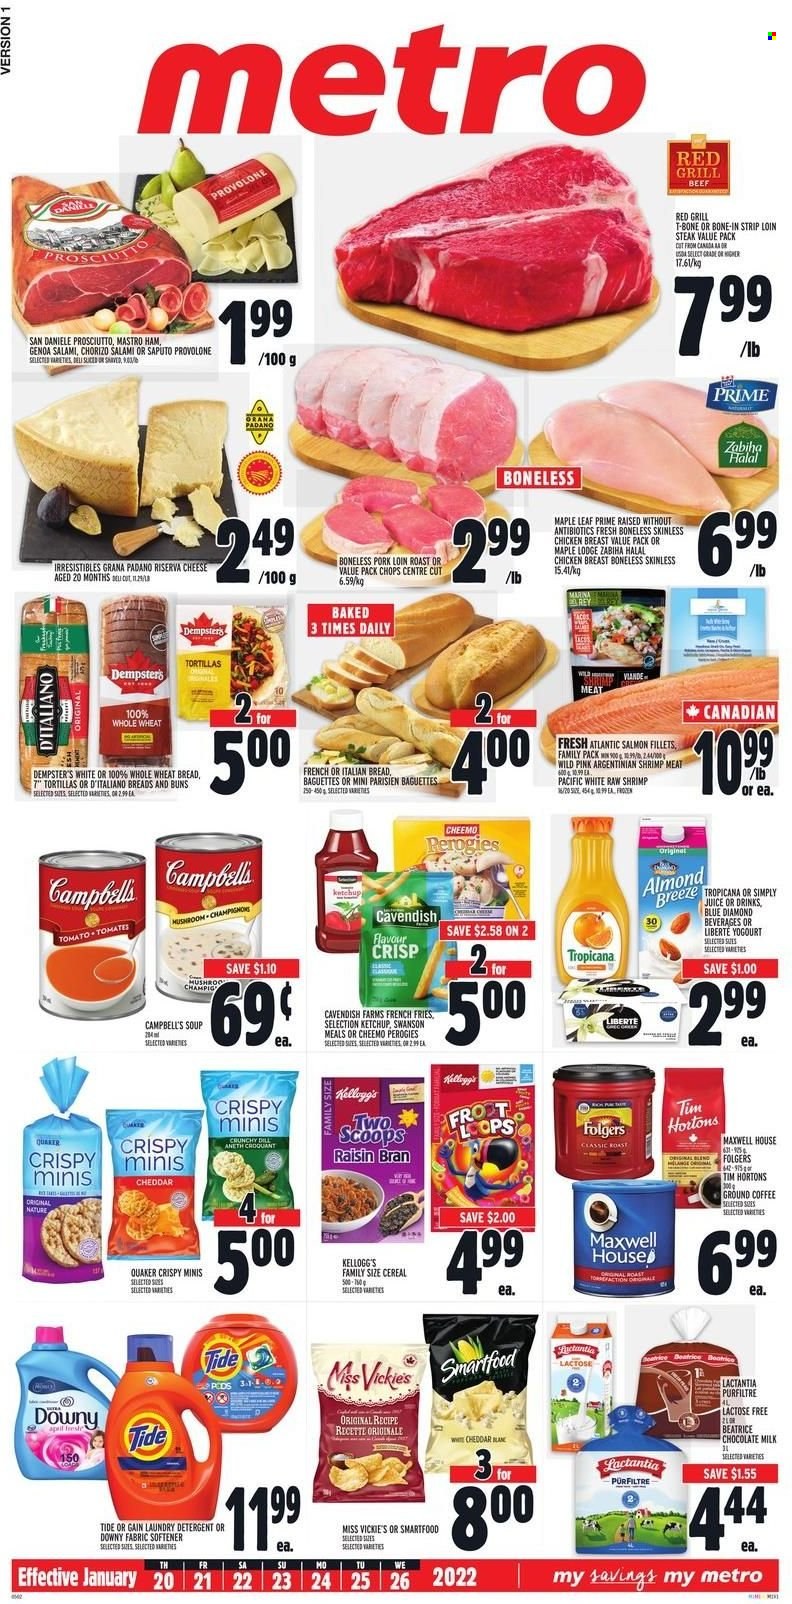 thumbnail - Metro Flyer - January 20, 2022 - January 26, 2022 - Sales products - tortillas, wheat bread, buns, salmon, salmon fillet, shrimps, Campbell's, soup, Quaker, salami, ham, prosciutto, cheddar, cheese, Provolone, Grana Padano, milk, Almond Breeze, potato fries, french fries, milk chocolate, chocolate, Kellogg's, Smartfood, cereals, Raisin Bran, Blue Diamond, juice, Maxwell House, coffee, Folgers, ground coffee, chicken breasts, chicken, beef meat, t-bone steak, pork loin, pork meat, Gain, Tide, fabric softener, laundry detergent, Downy Laundry, baguette, detergent, ketchup, chorizo, steak. Page 1.